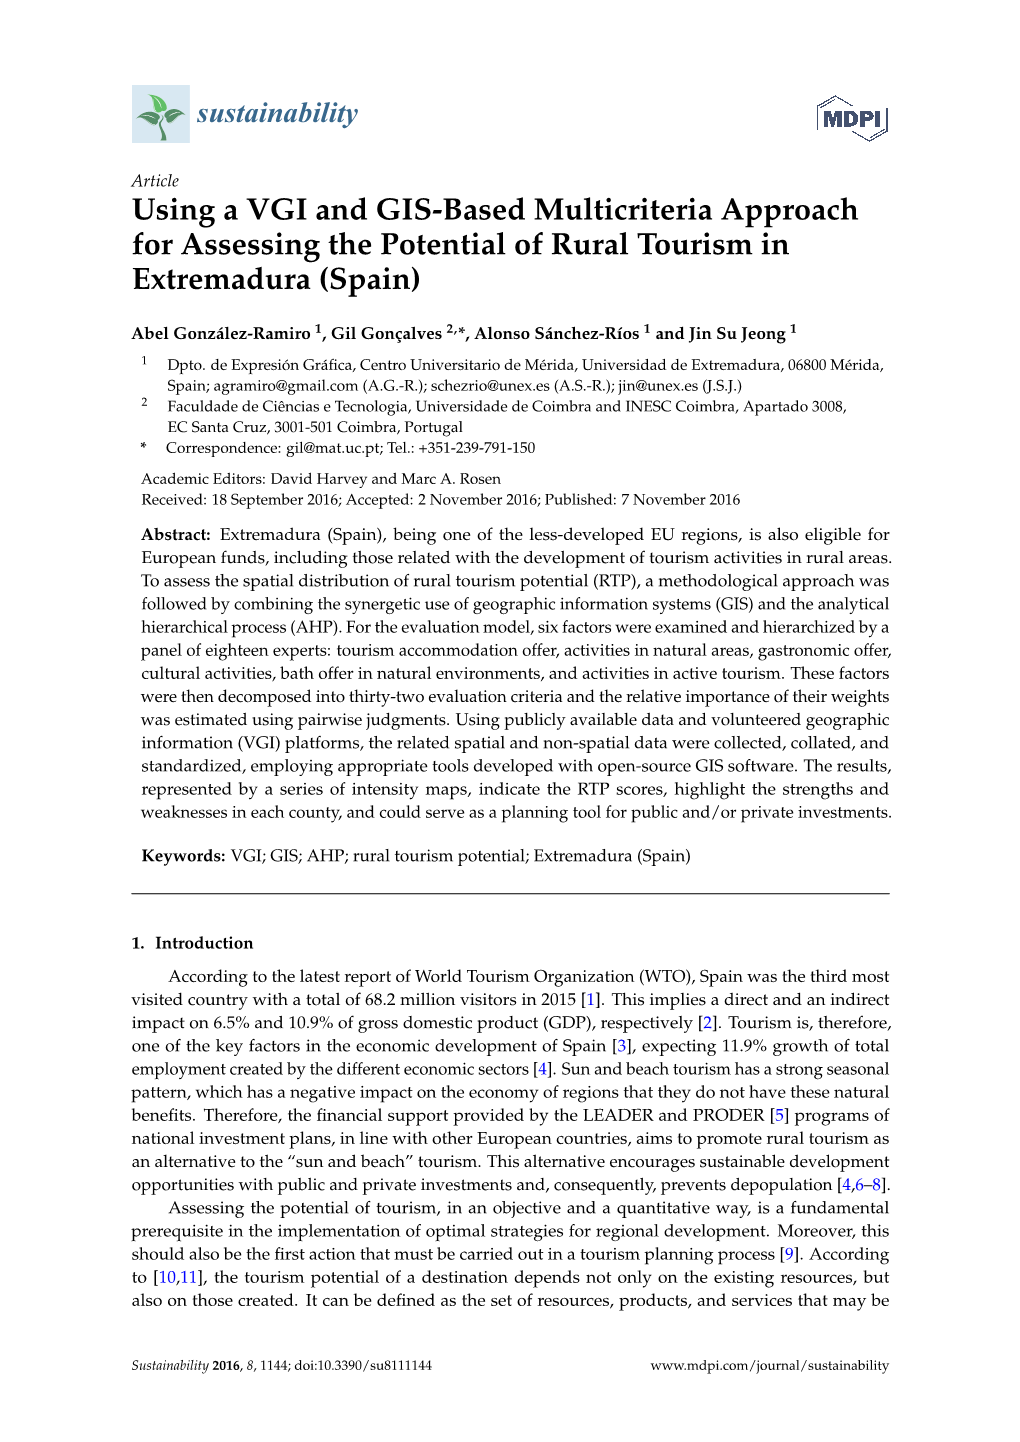 Using a VGI and GIS-Based Multicriteria Approach for Assessing the Potential of Rural Tourism in Extremadura (Spain)